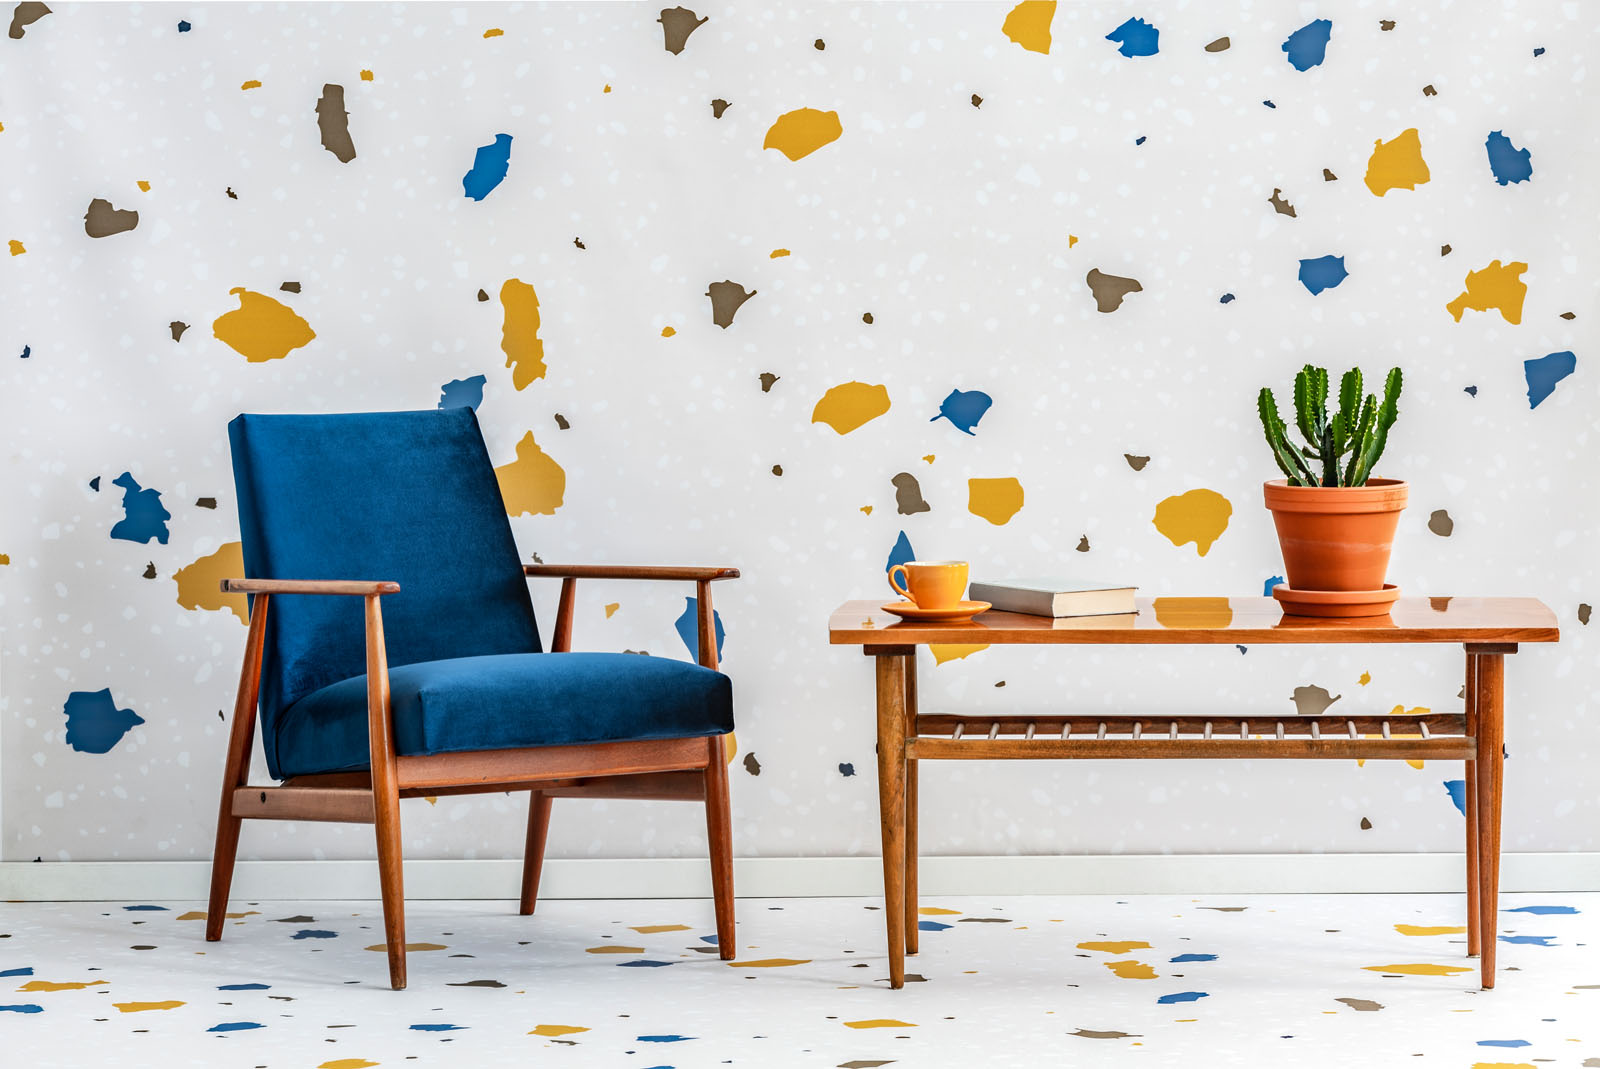 Mid-century modern, navy blue armchair and a retro wooden table in a white living room interior with lastrico pattern on the wall and floor. Real photo.